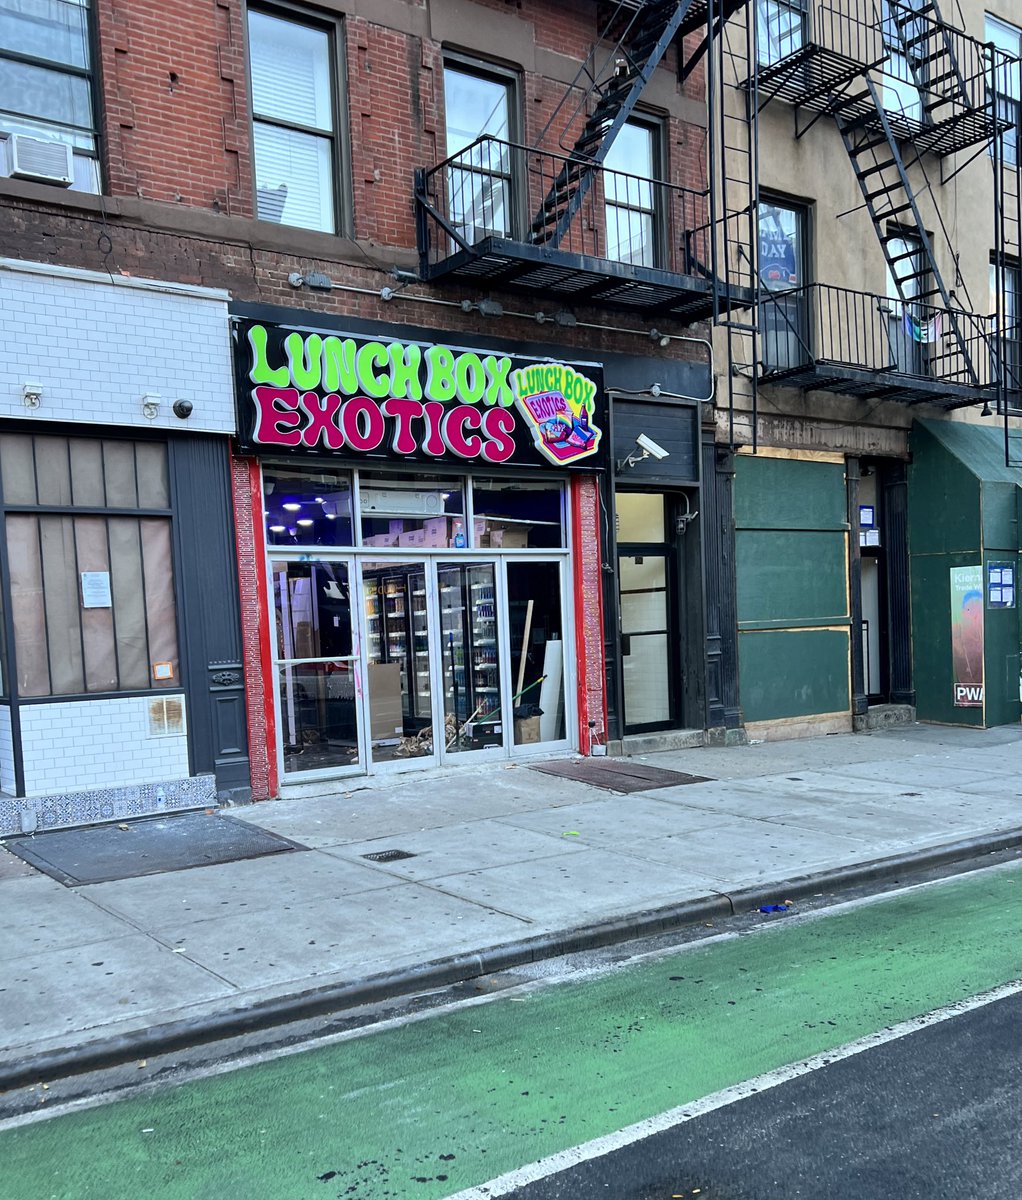 So many cannabis/smoke shops opening in Hells Kitchen. This isn’t even all in just a few blocks of 9th Ave. 🤮Don’t like. cc @ManhattanBoard4